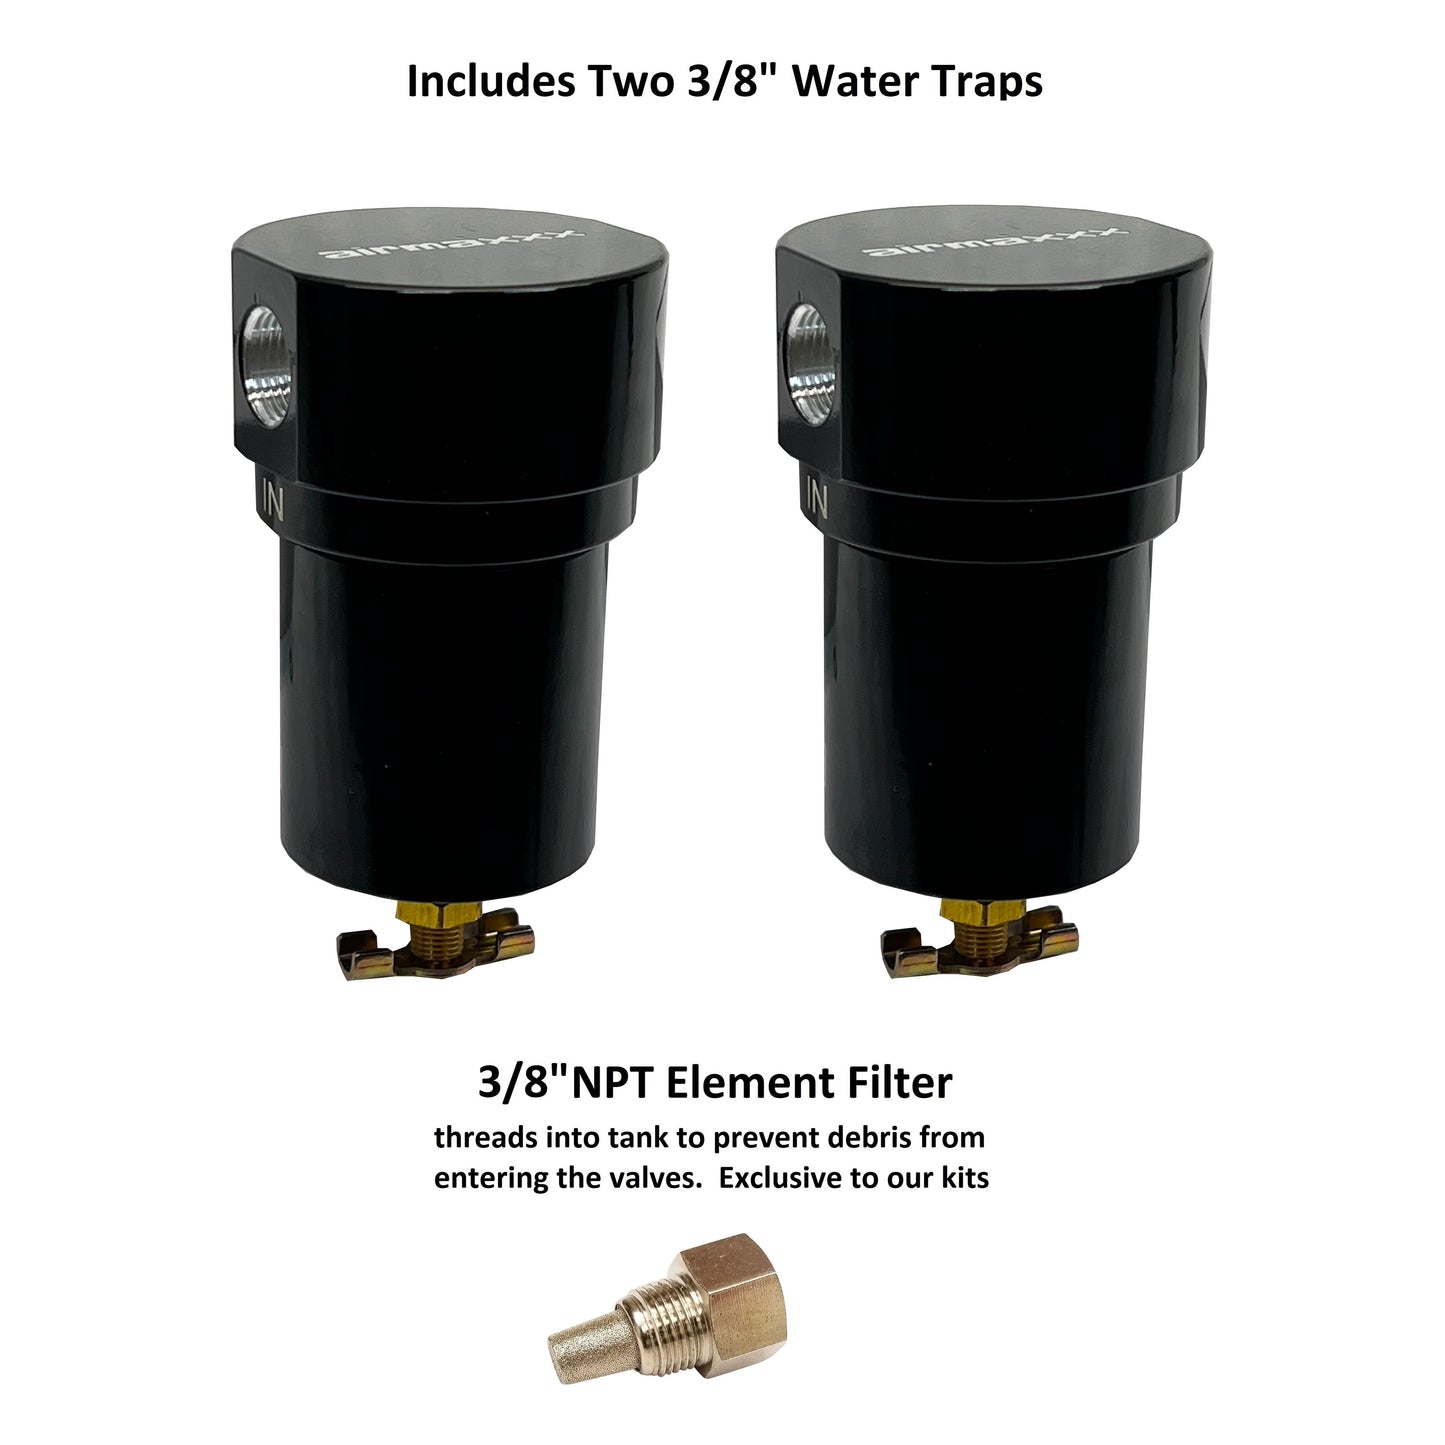 water traps and element filter